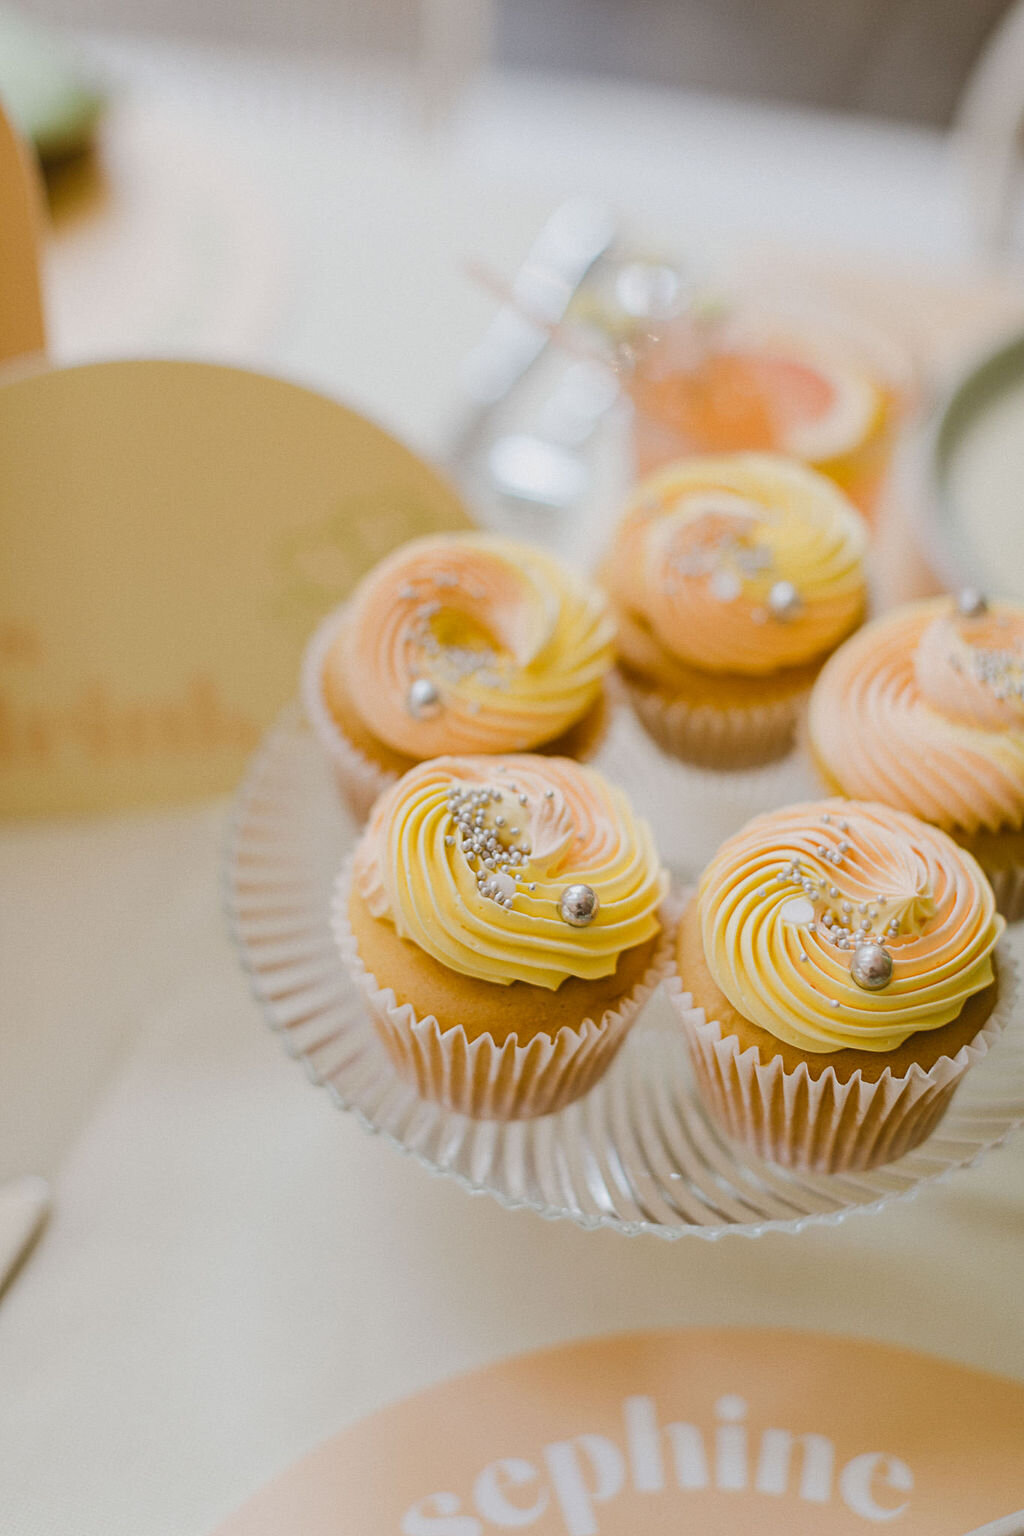 Violet & Salt smashed it out the park with their delectable praline pastel cupcakes. Equally impressive, their air rated limoncello slices, with their super light sponge and sauce packed with flavour, really brought the ‘wow factor’ to our hens …